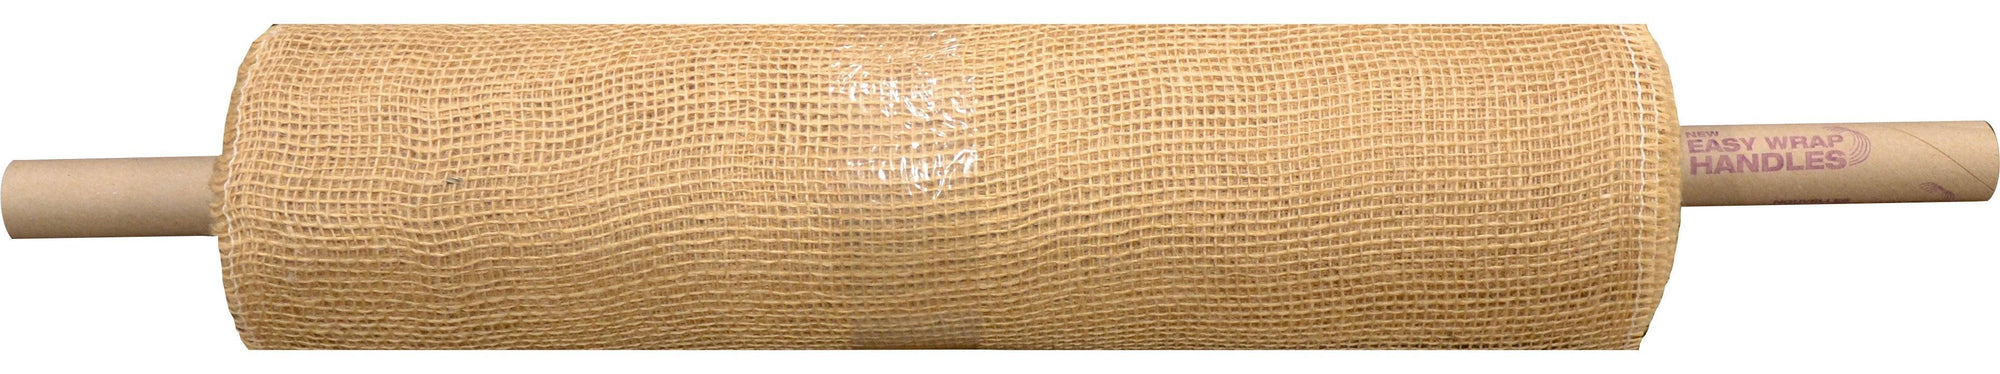 Burlap on a Roll with Handles - 20" x 50'